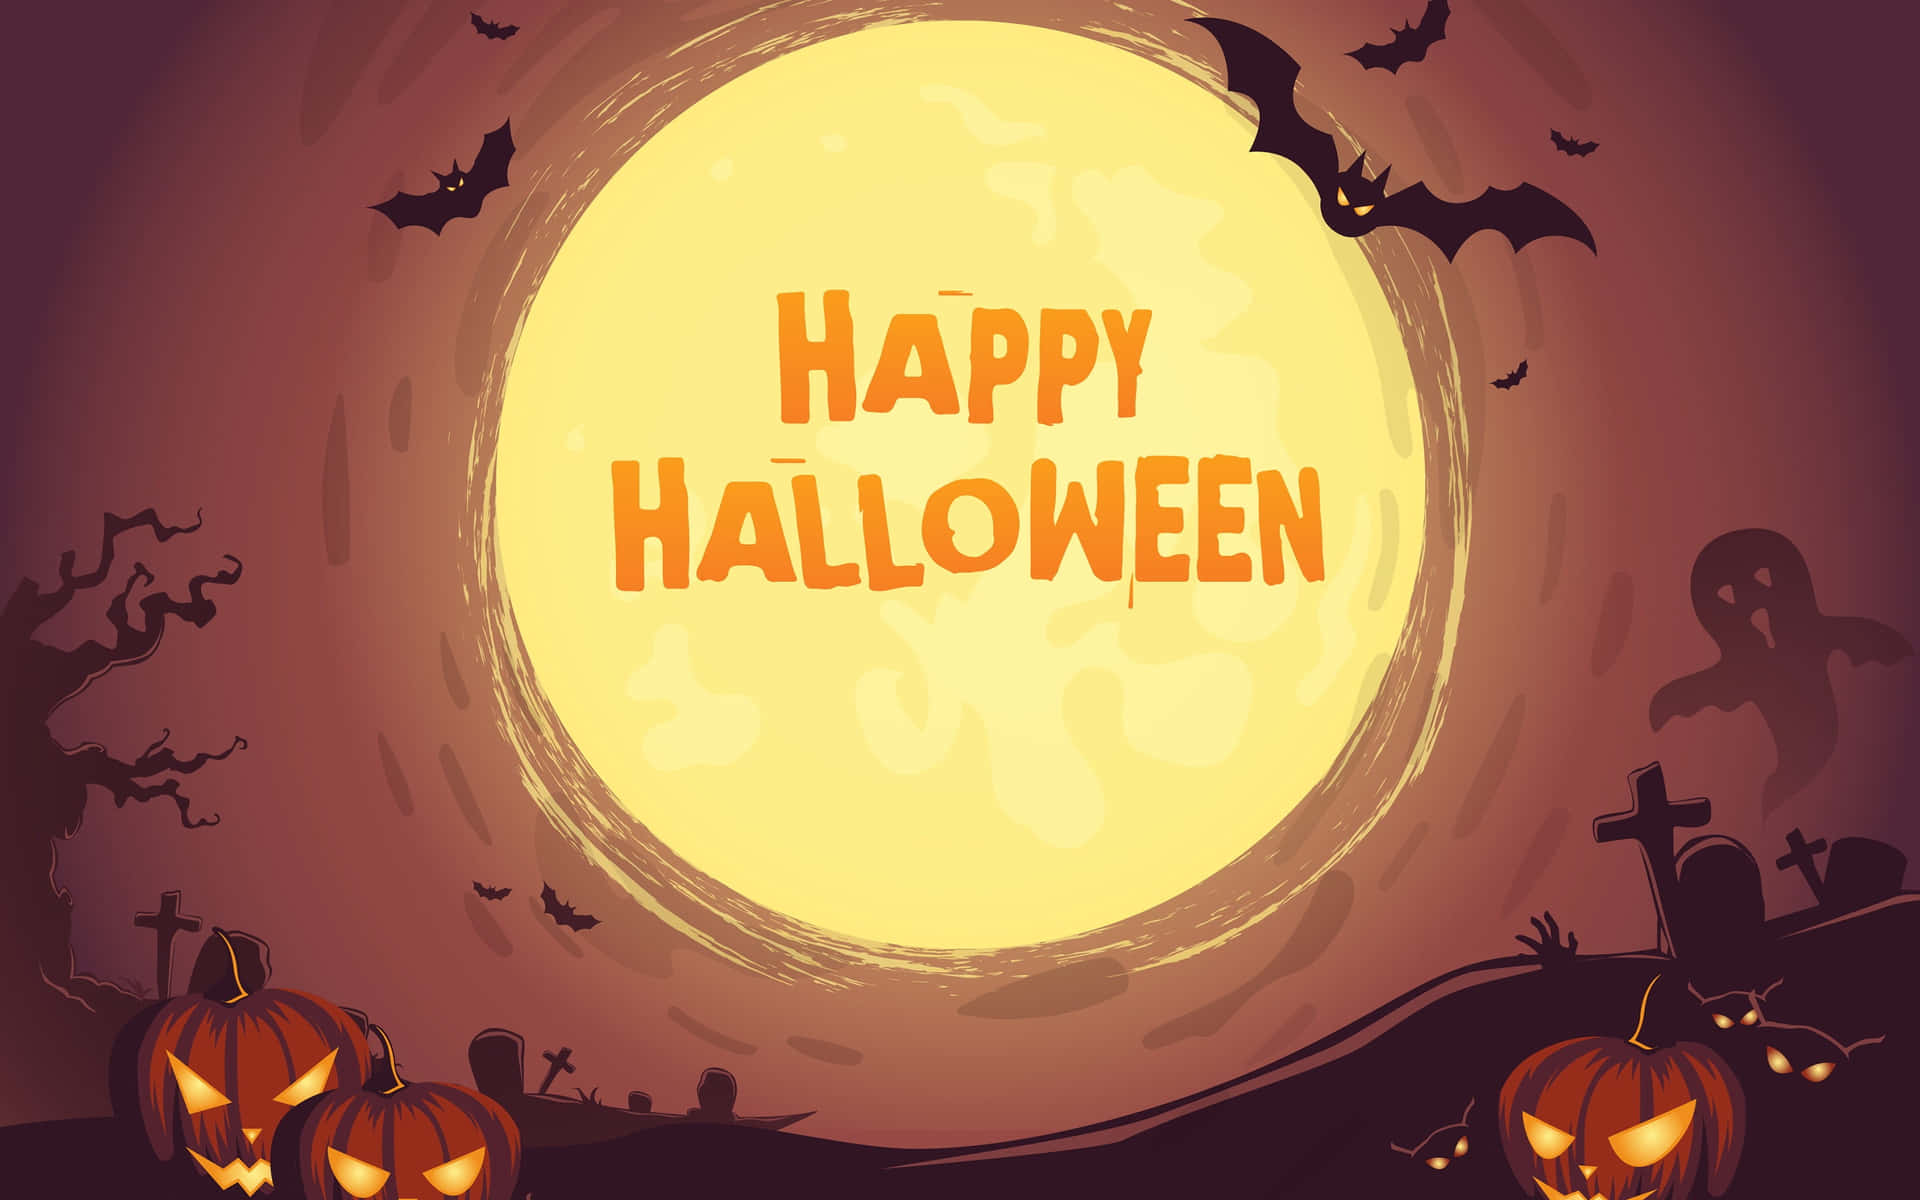 Happy Halloween Background With Pumpkins And Bats